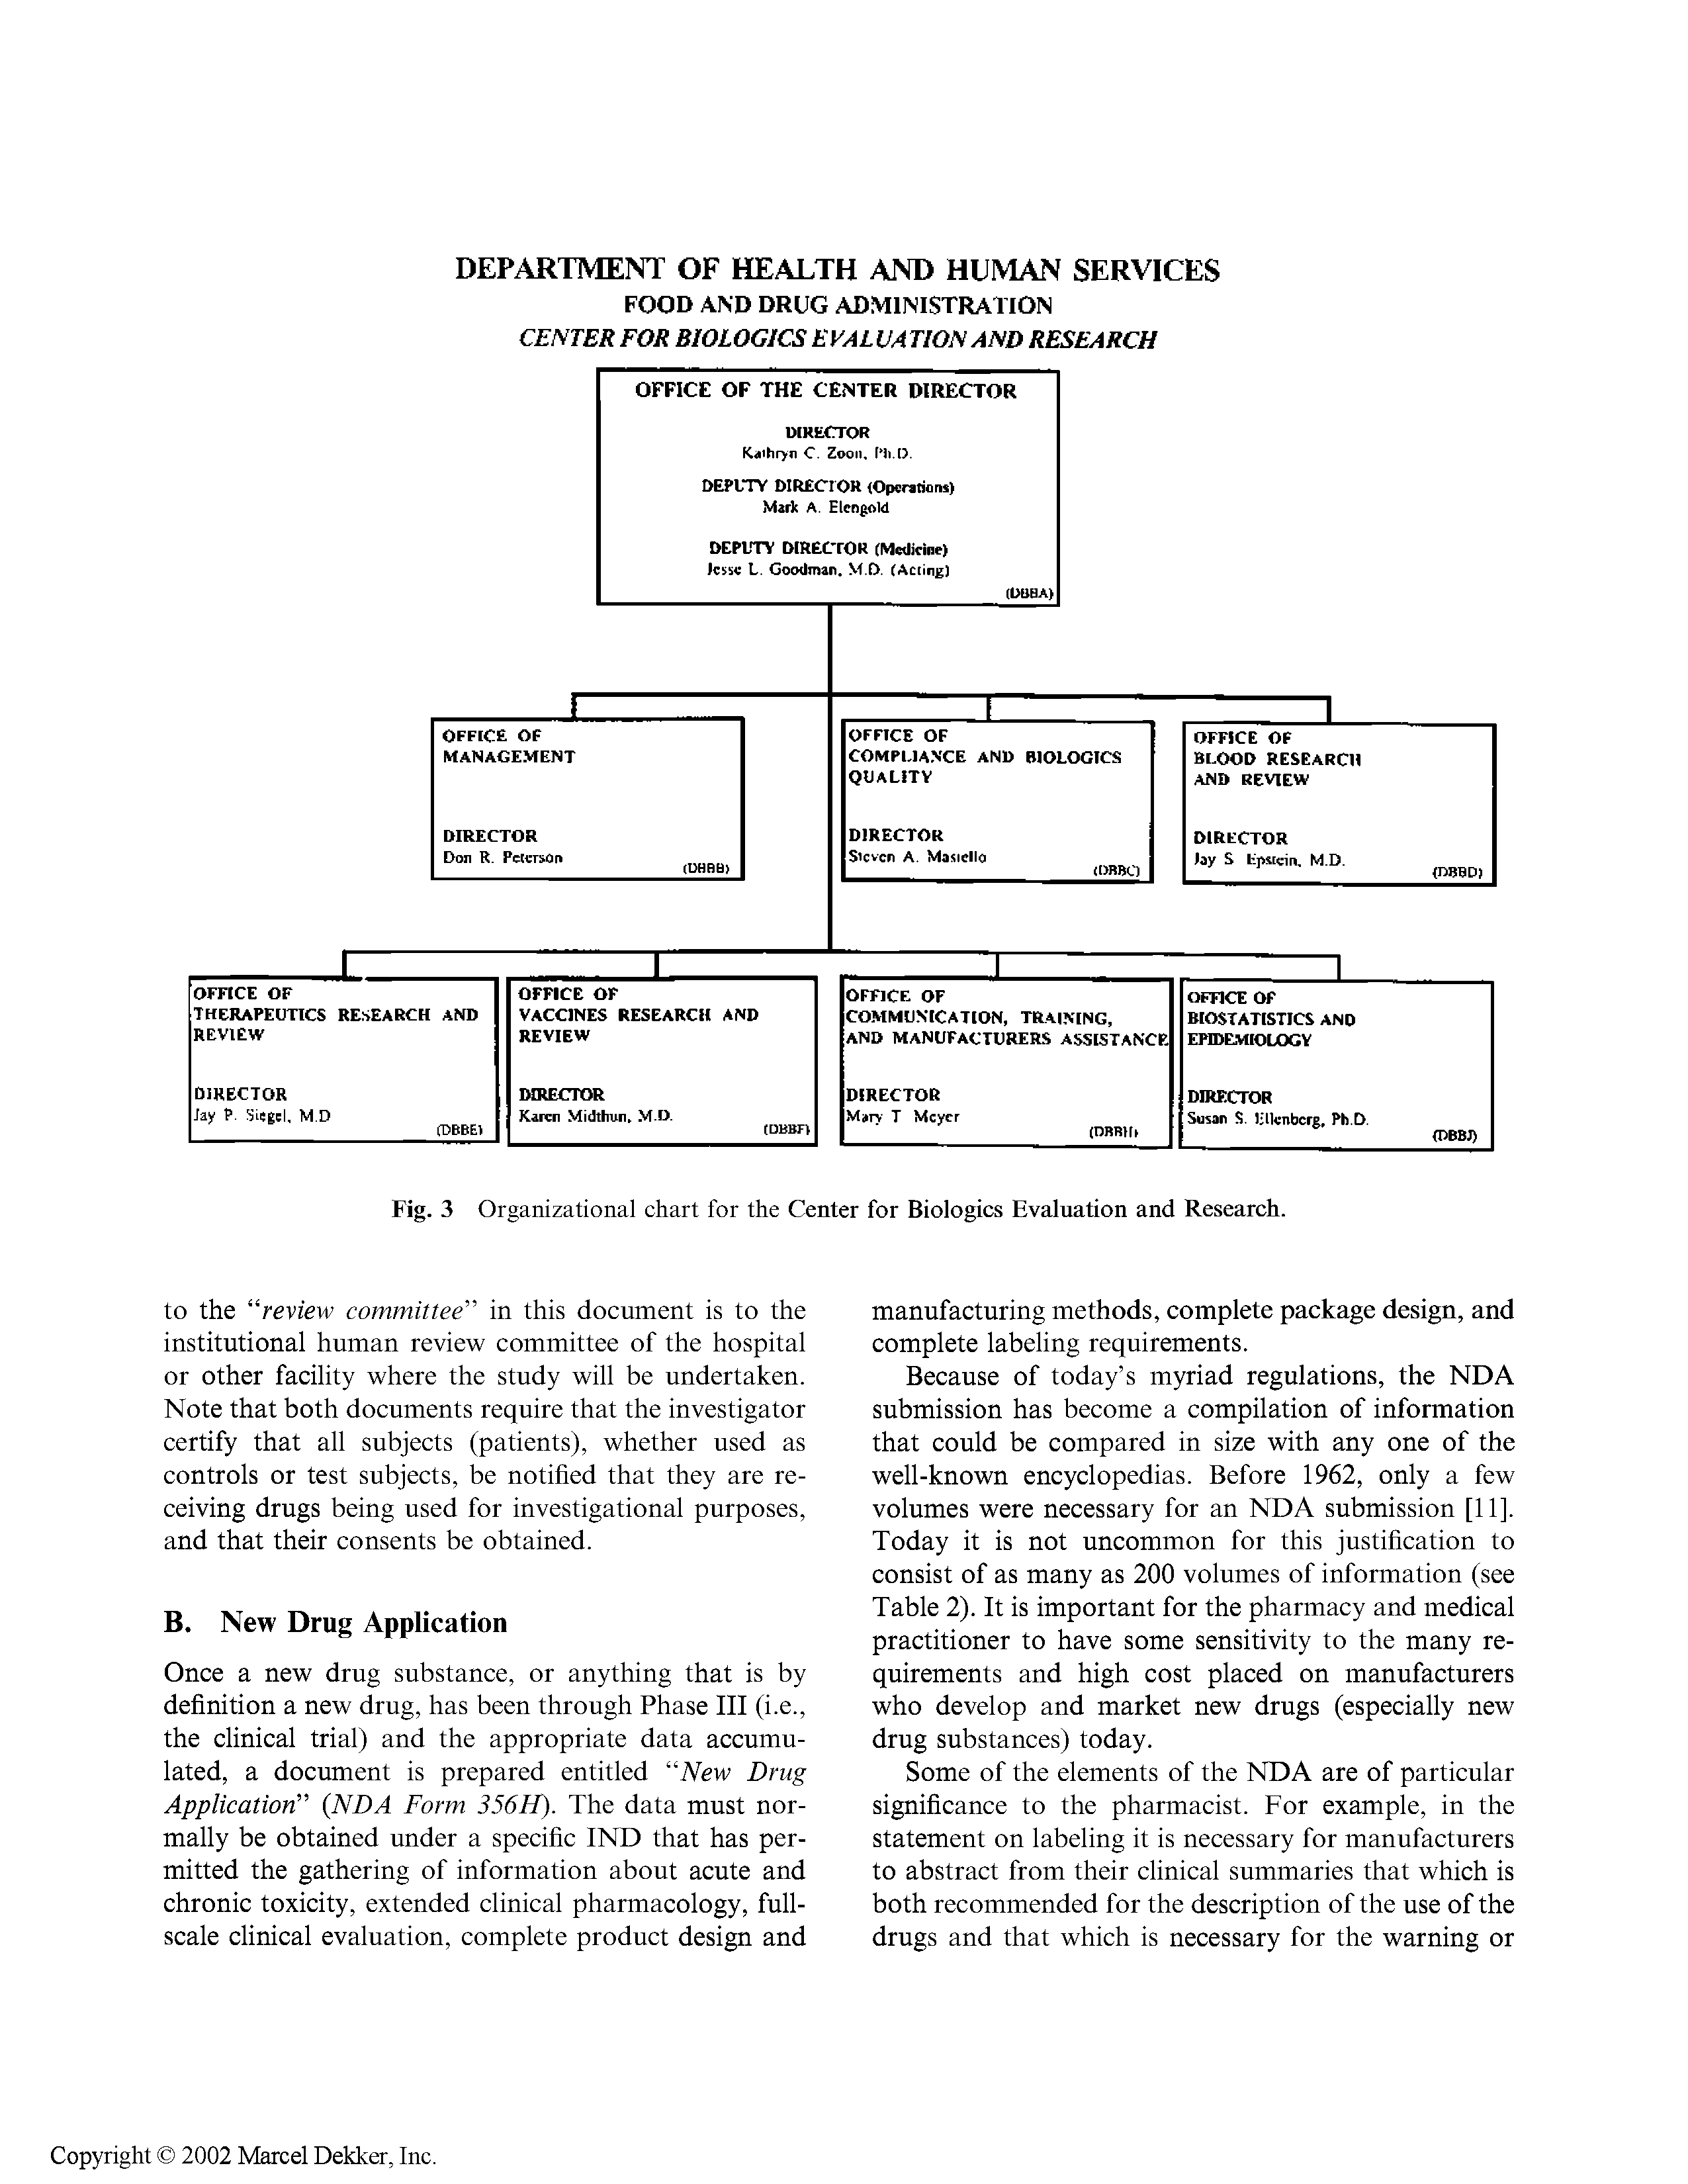 Fig. 3 Organizational chart for the Center for Biologies Evaluation and Research.